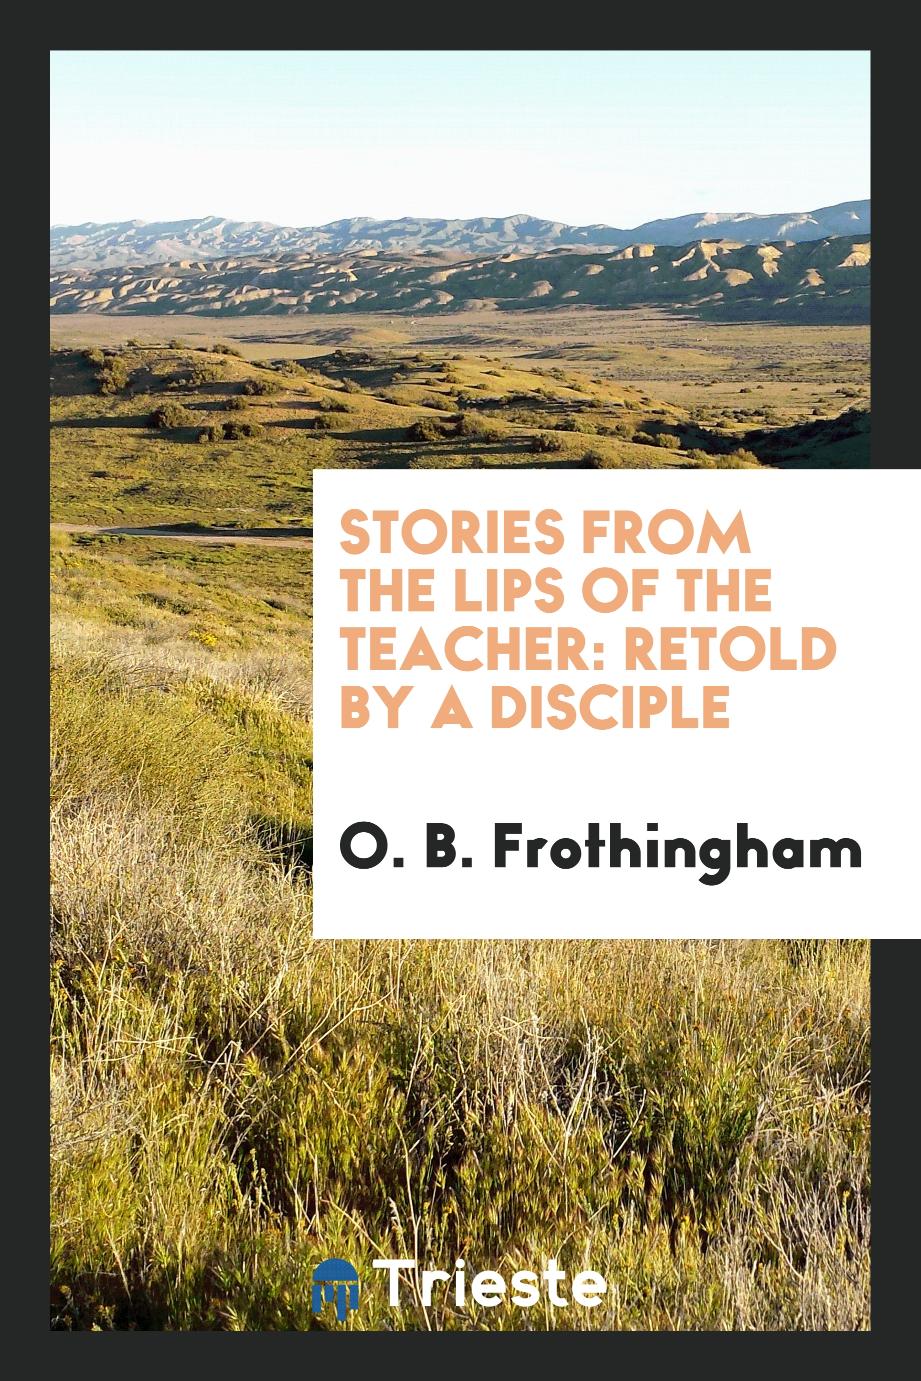 Stories from the Lips of the Teacher: Retold by a Disciple